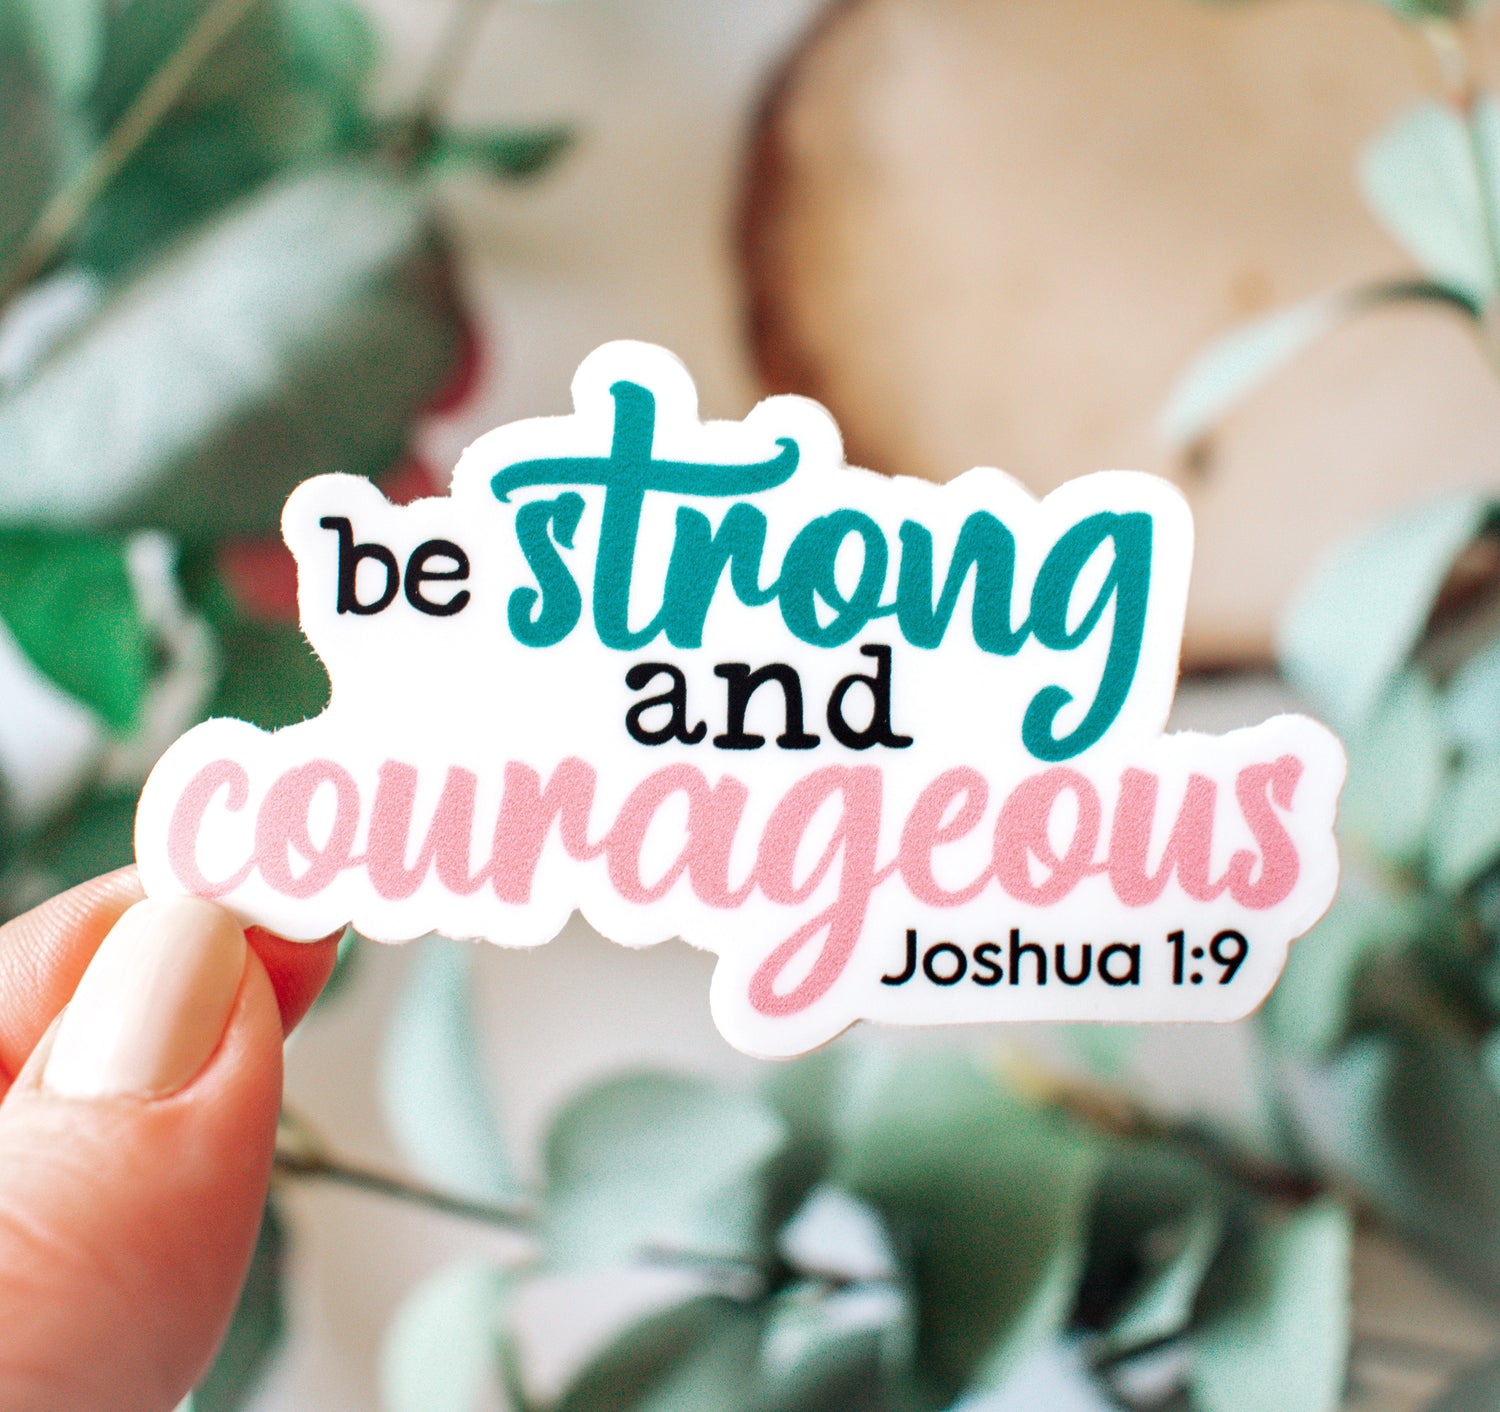 Be strong and courageous, Joshua 1:9 Bible verse Christian sticker